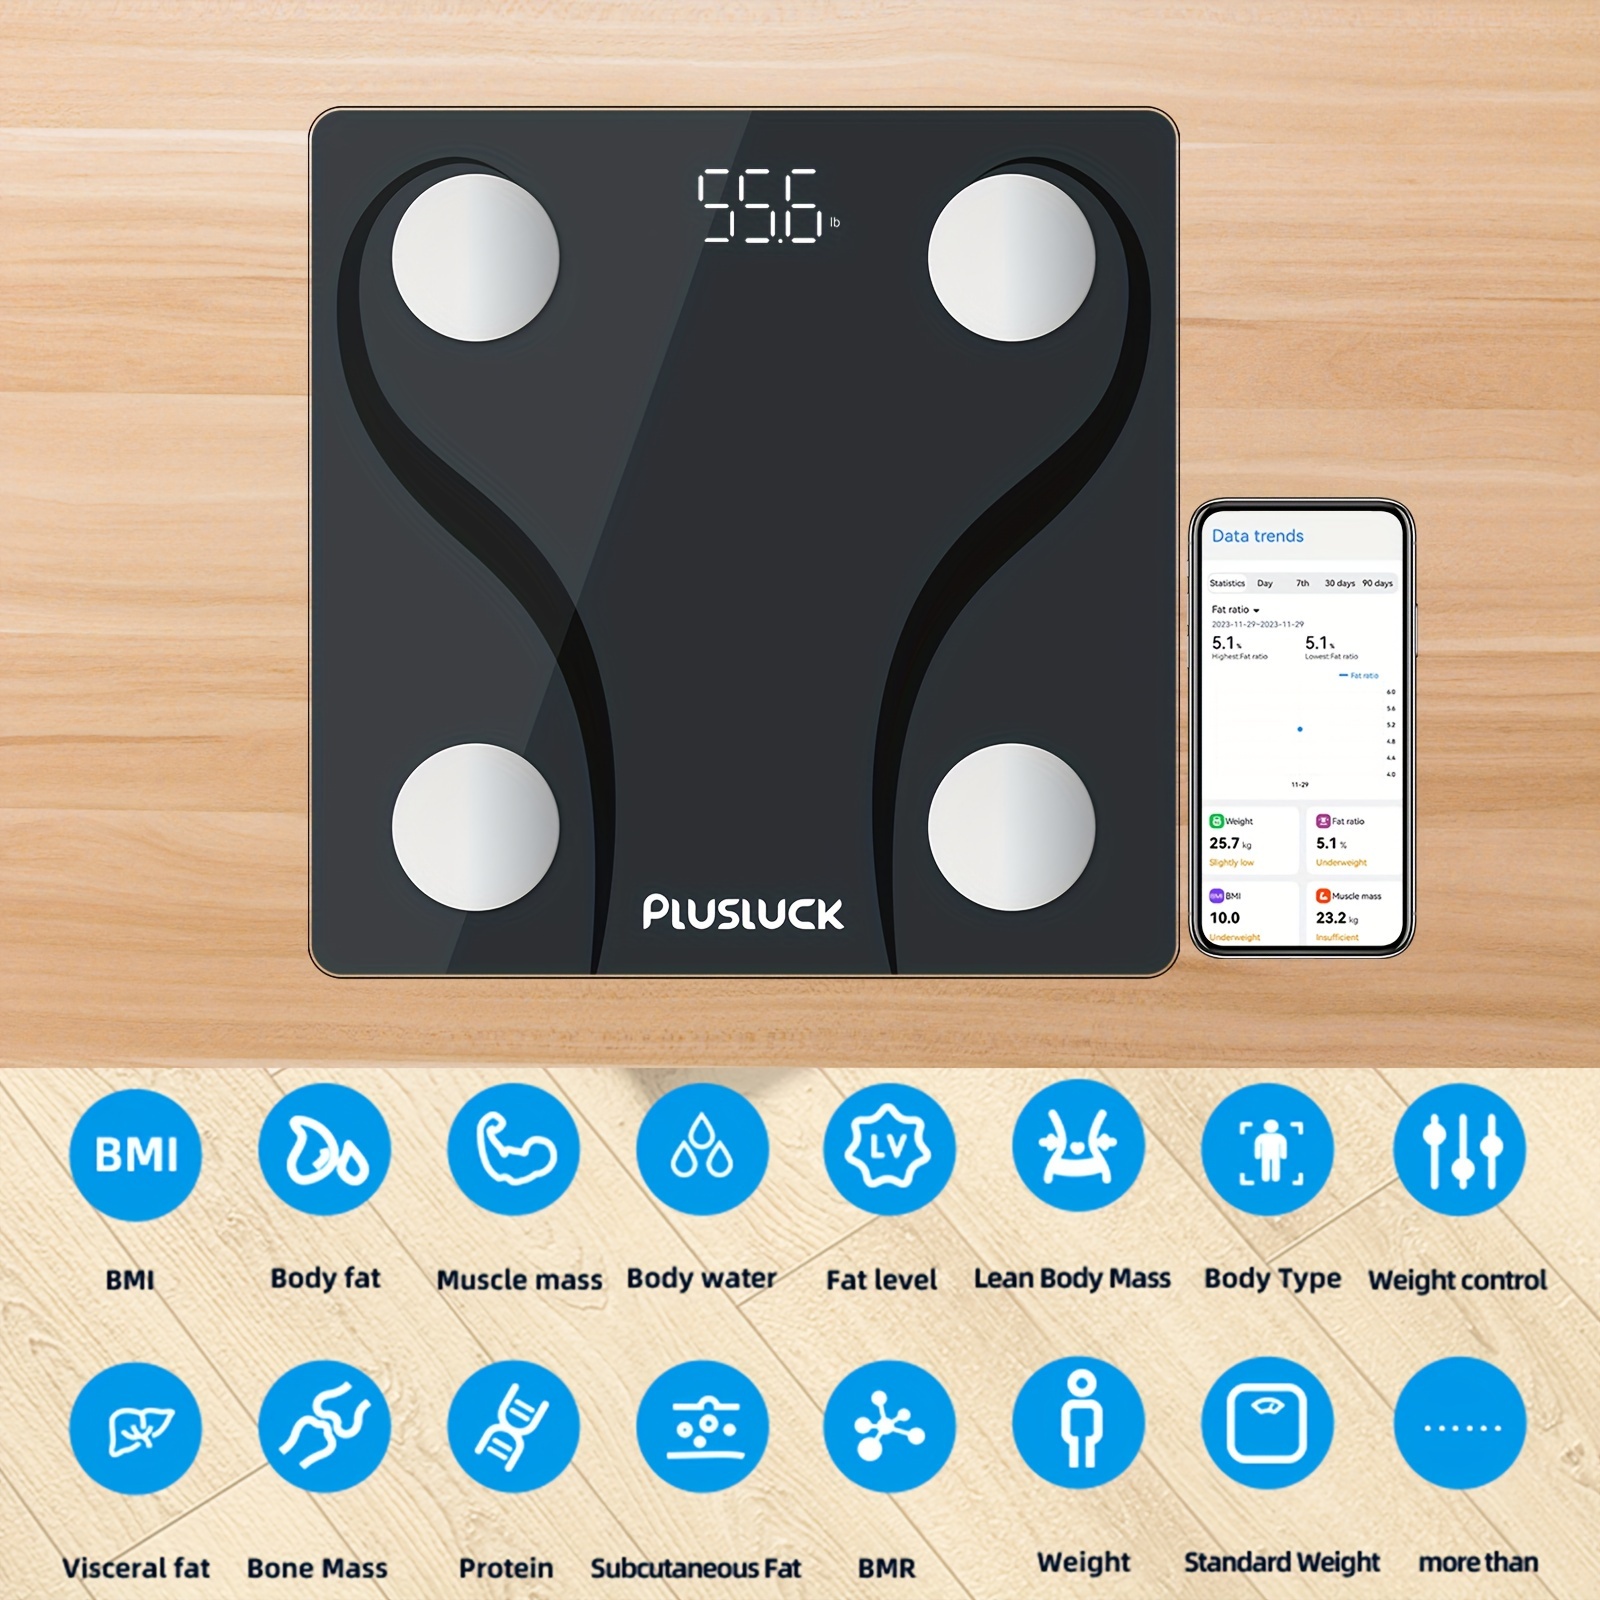 

Plusluck Smart Scale For Body Weight, Digital Bathroom Scale Bmi Weighing Body Fat Scale, Body Composition Monitor Health Analyzer With Smartphone App